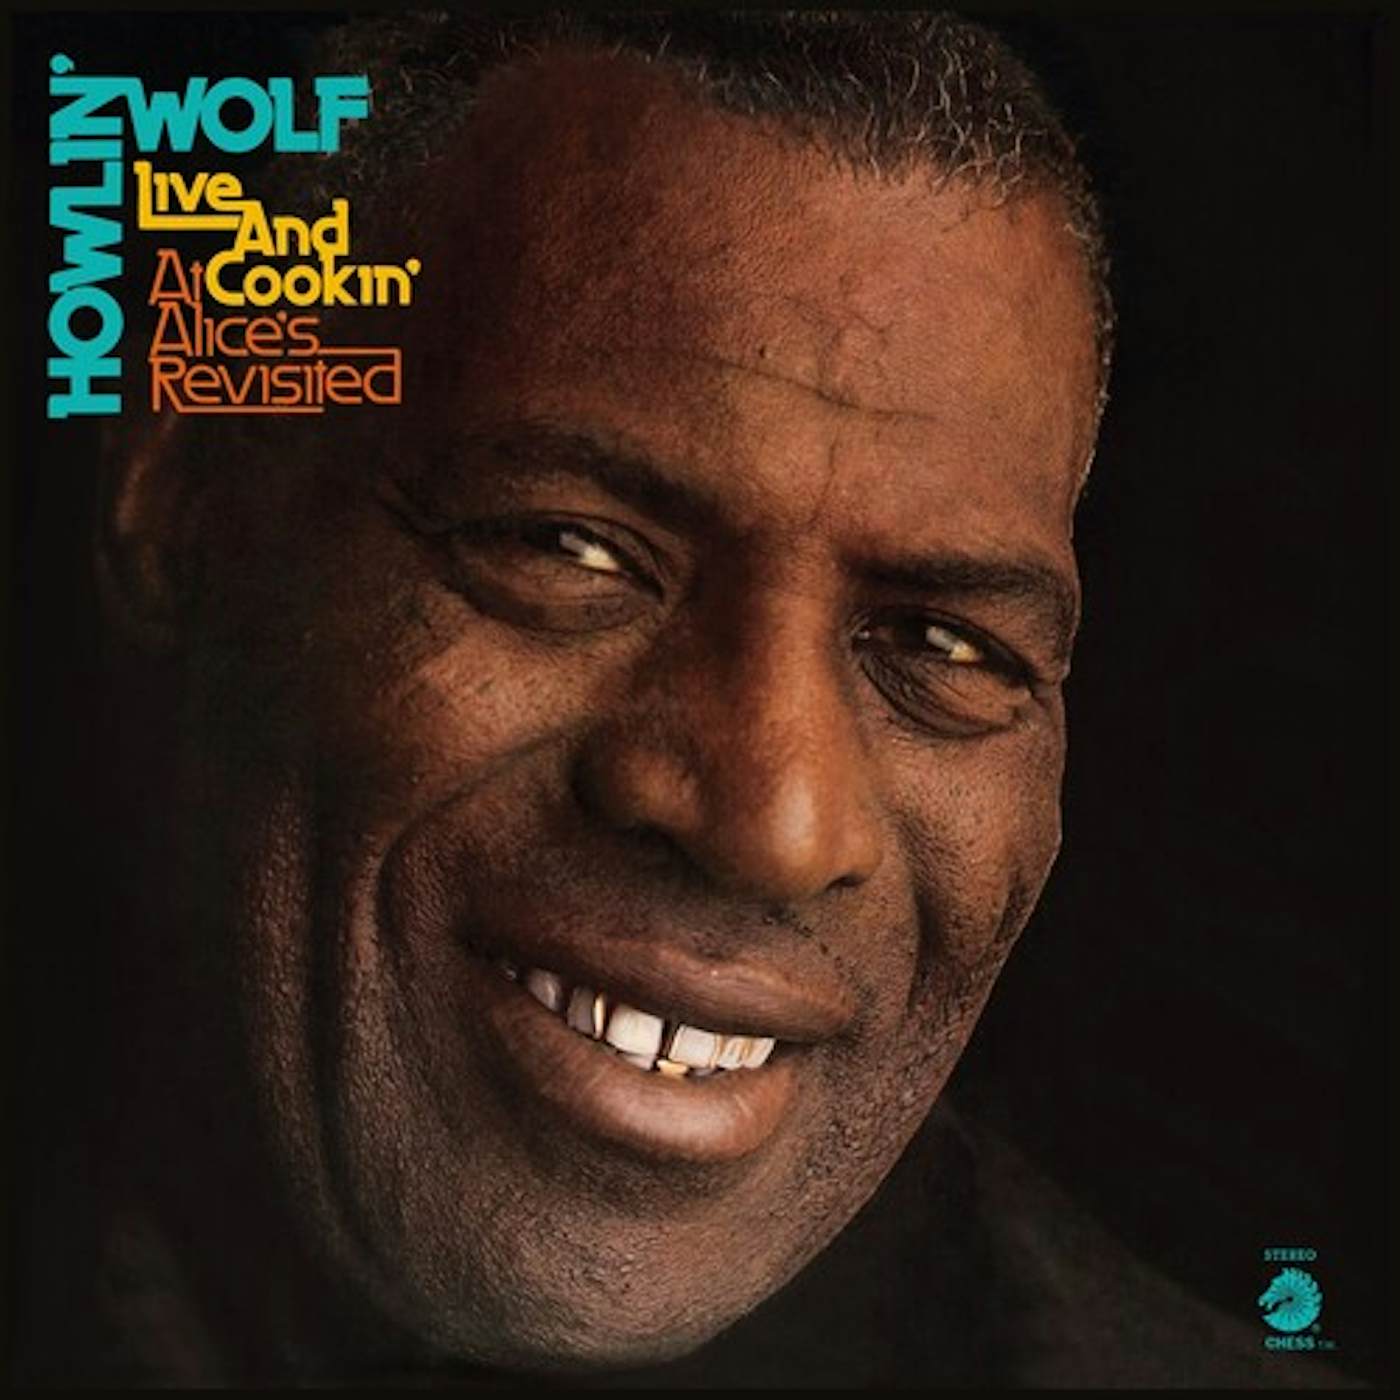 Howlin' Wolf LIVE AND COOKIN AT ALICE'S REVISITED Vinyl Record